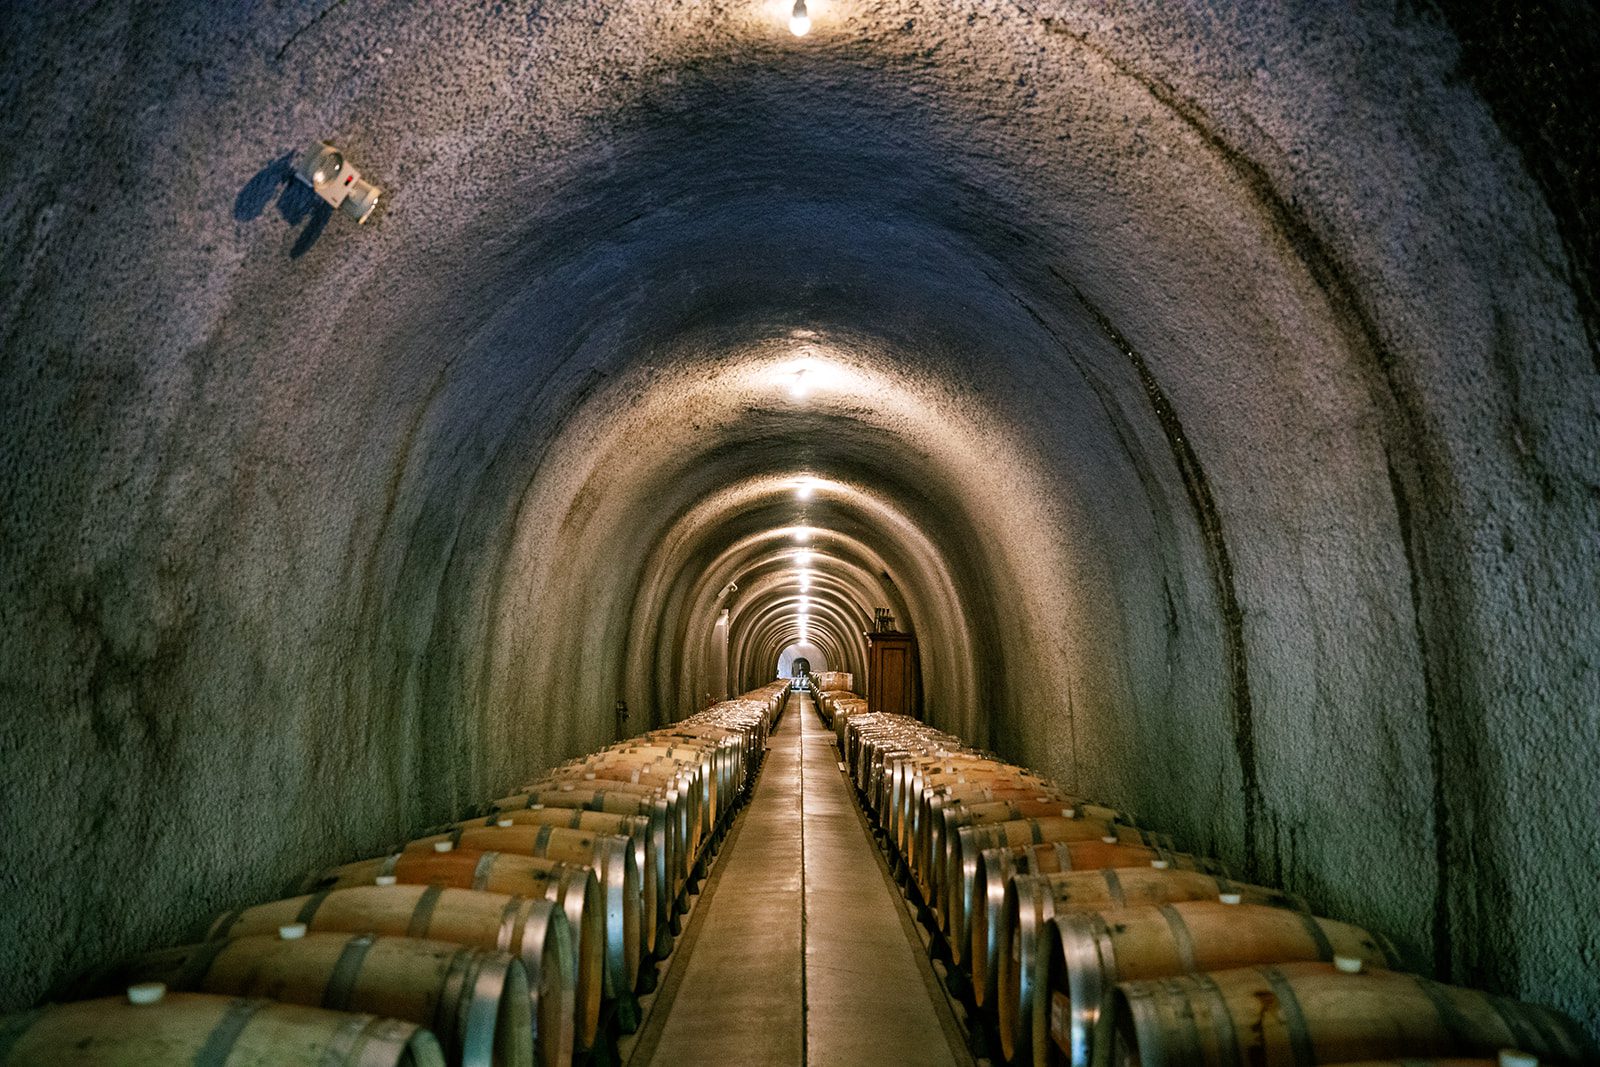 A wine cellar with rows of barrels lined up in a tunnel.